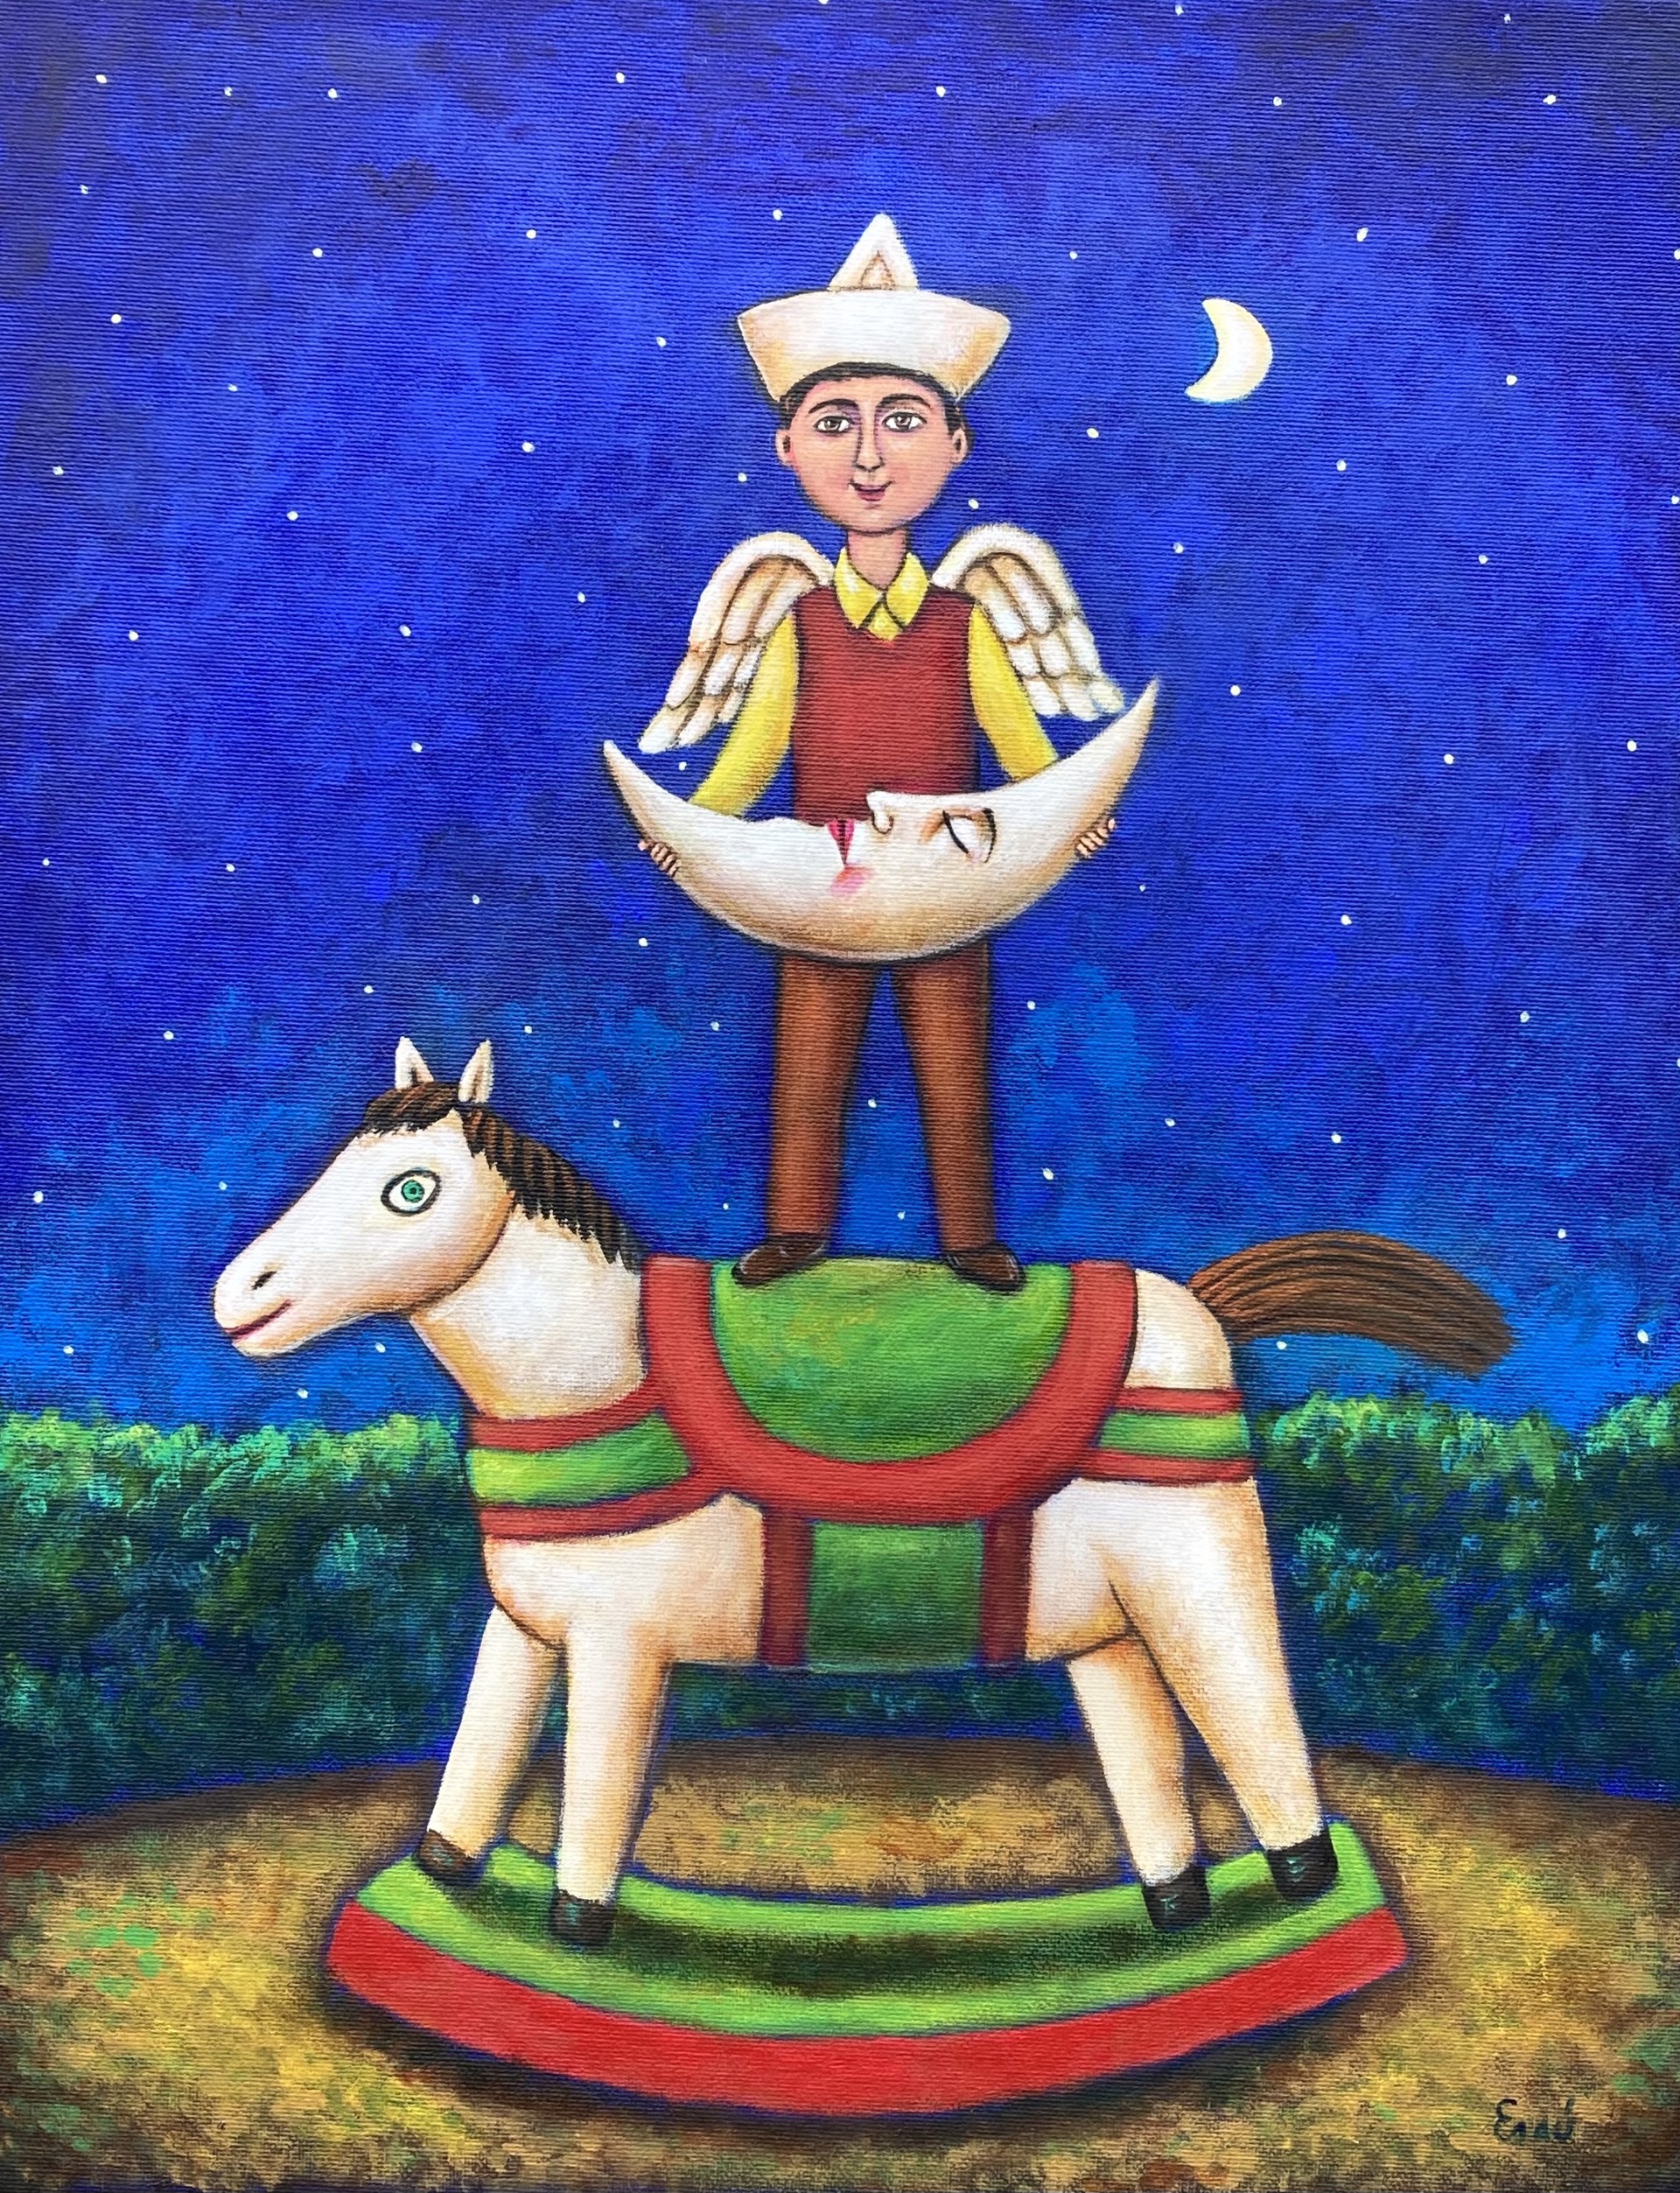 Ángel with Moon by Esau Andrade